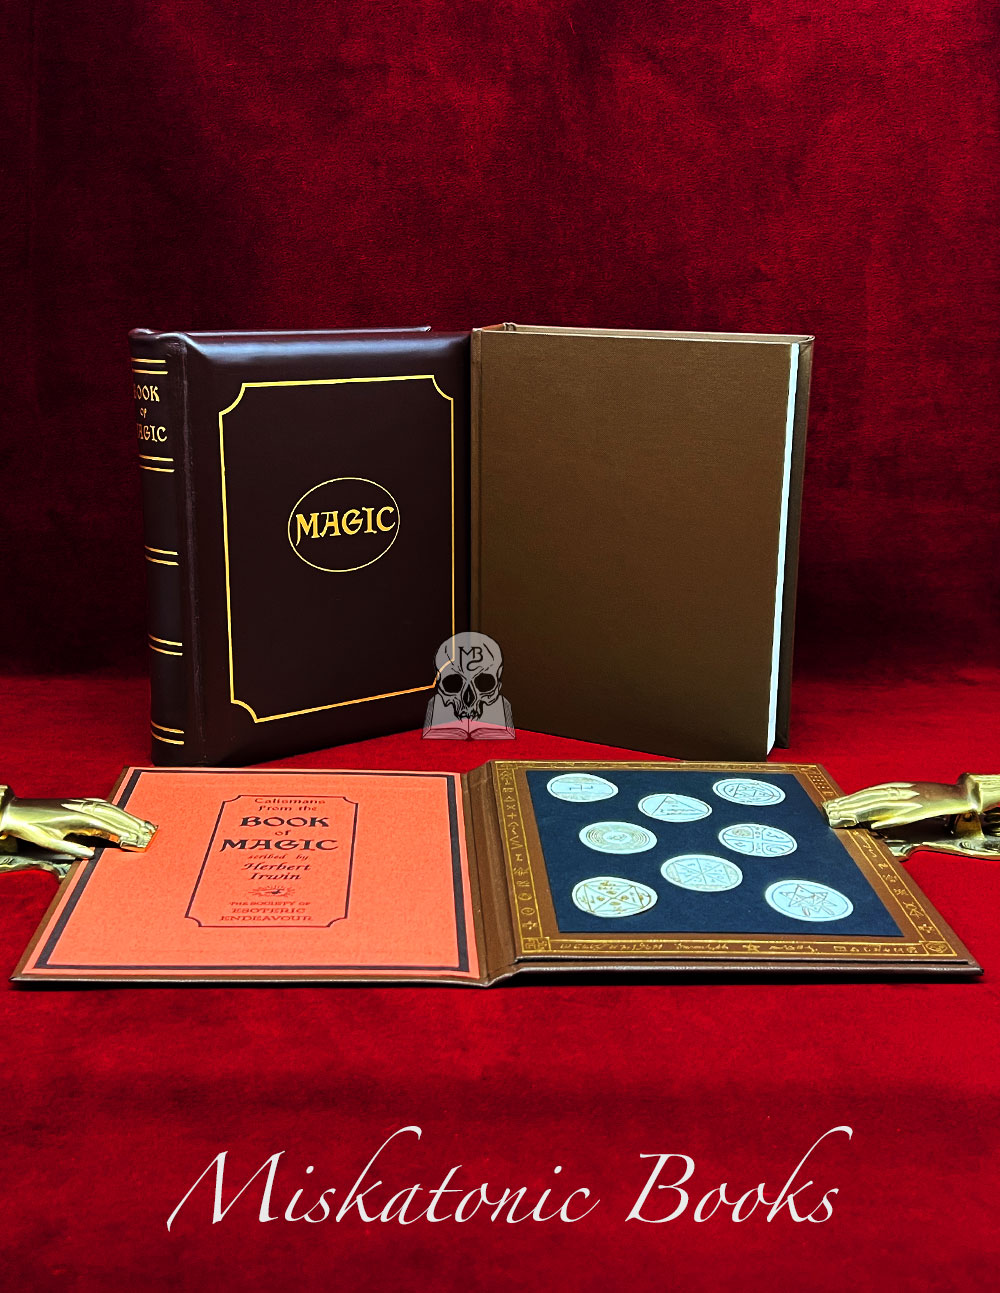 BOOK OF MAGIC by Anon (Herbert Irwin) - Deluxe Limited Edition Hardcover in Custom Slipcase